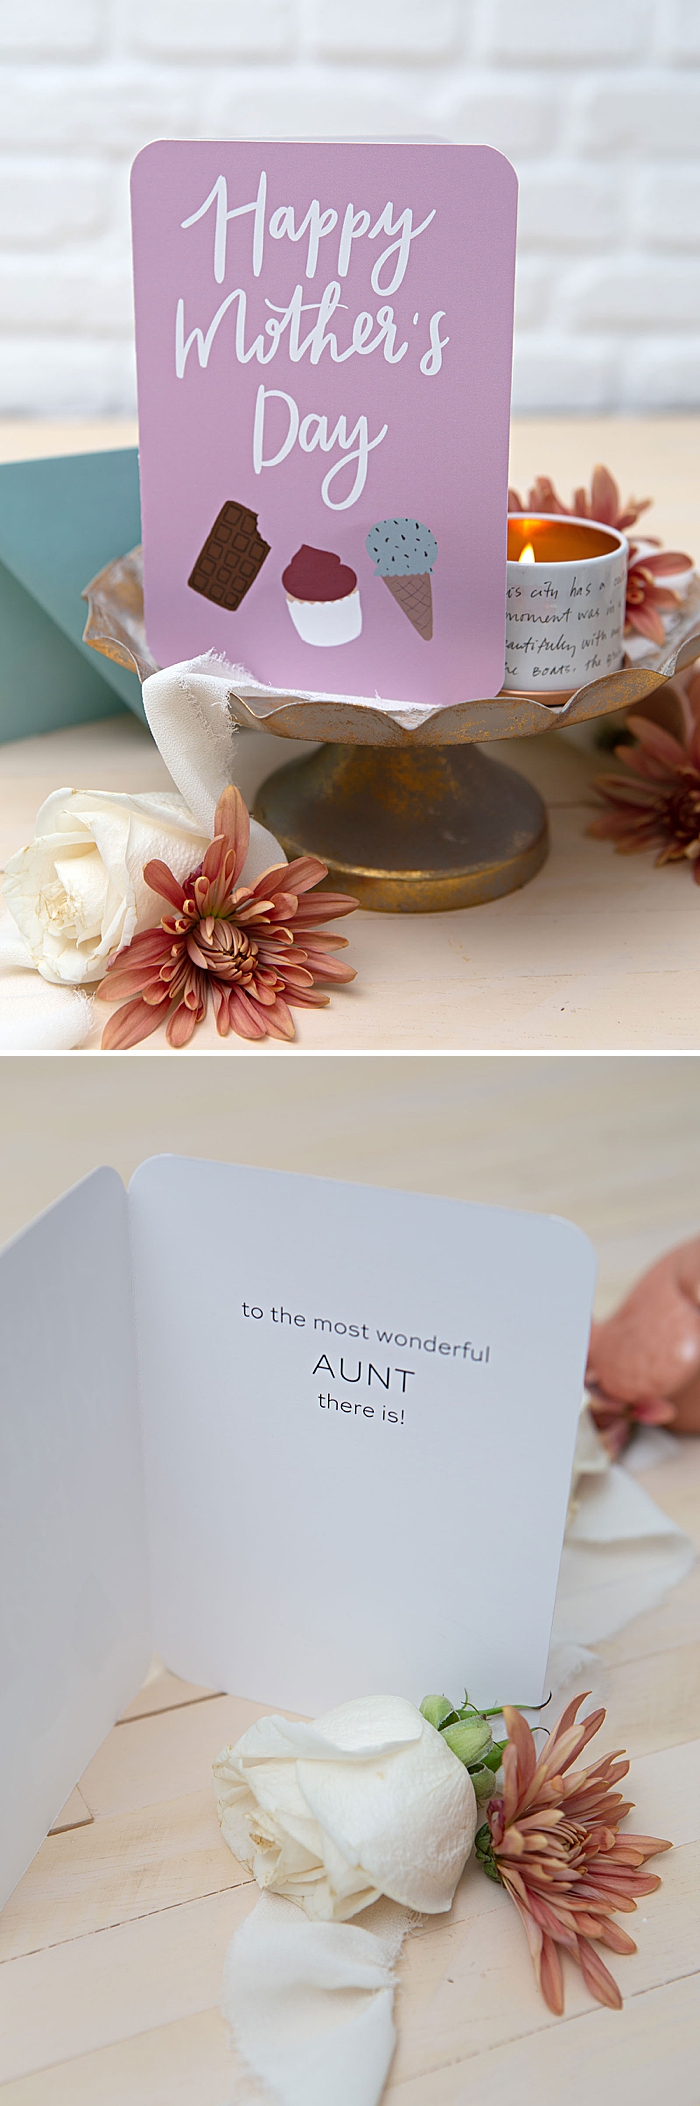 Free printable mothers day card for your Aunt!